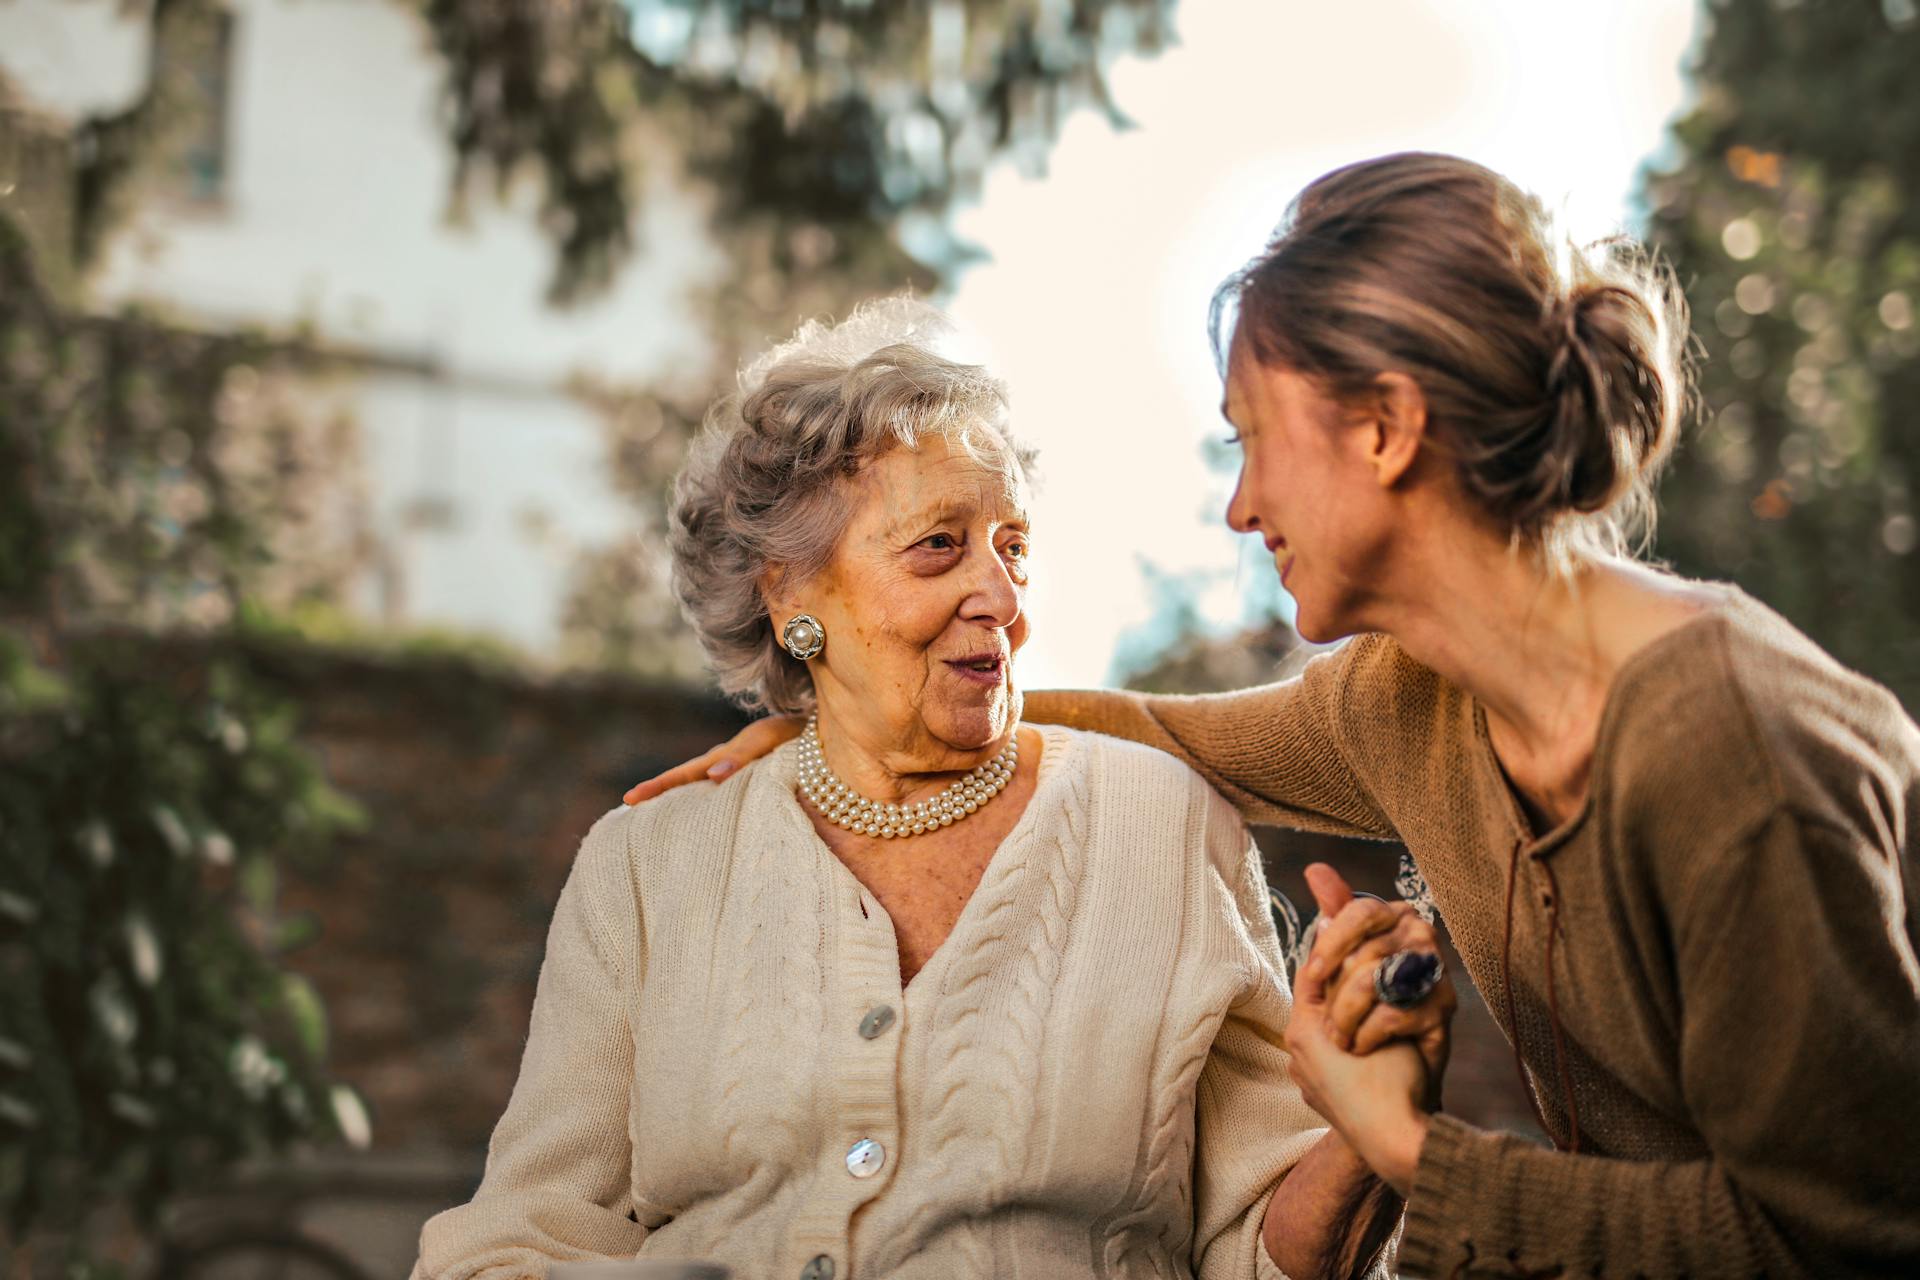 A mother speaking to her daughter | Source: Pexels